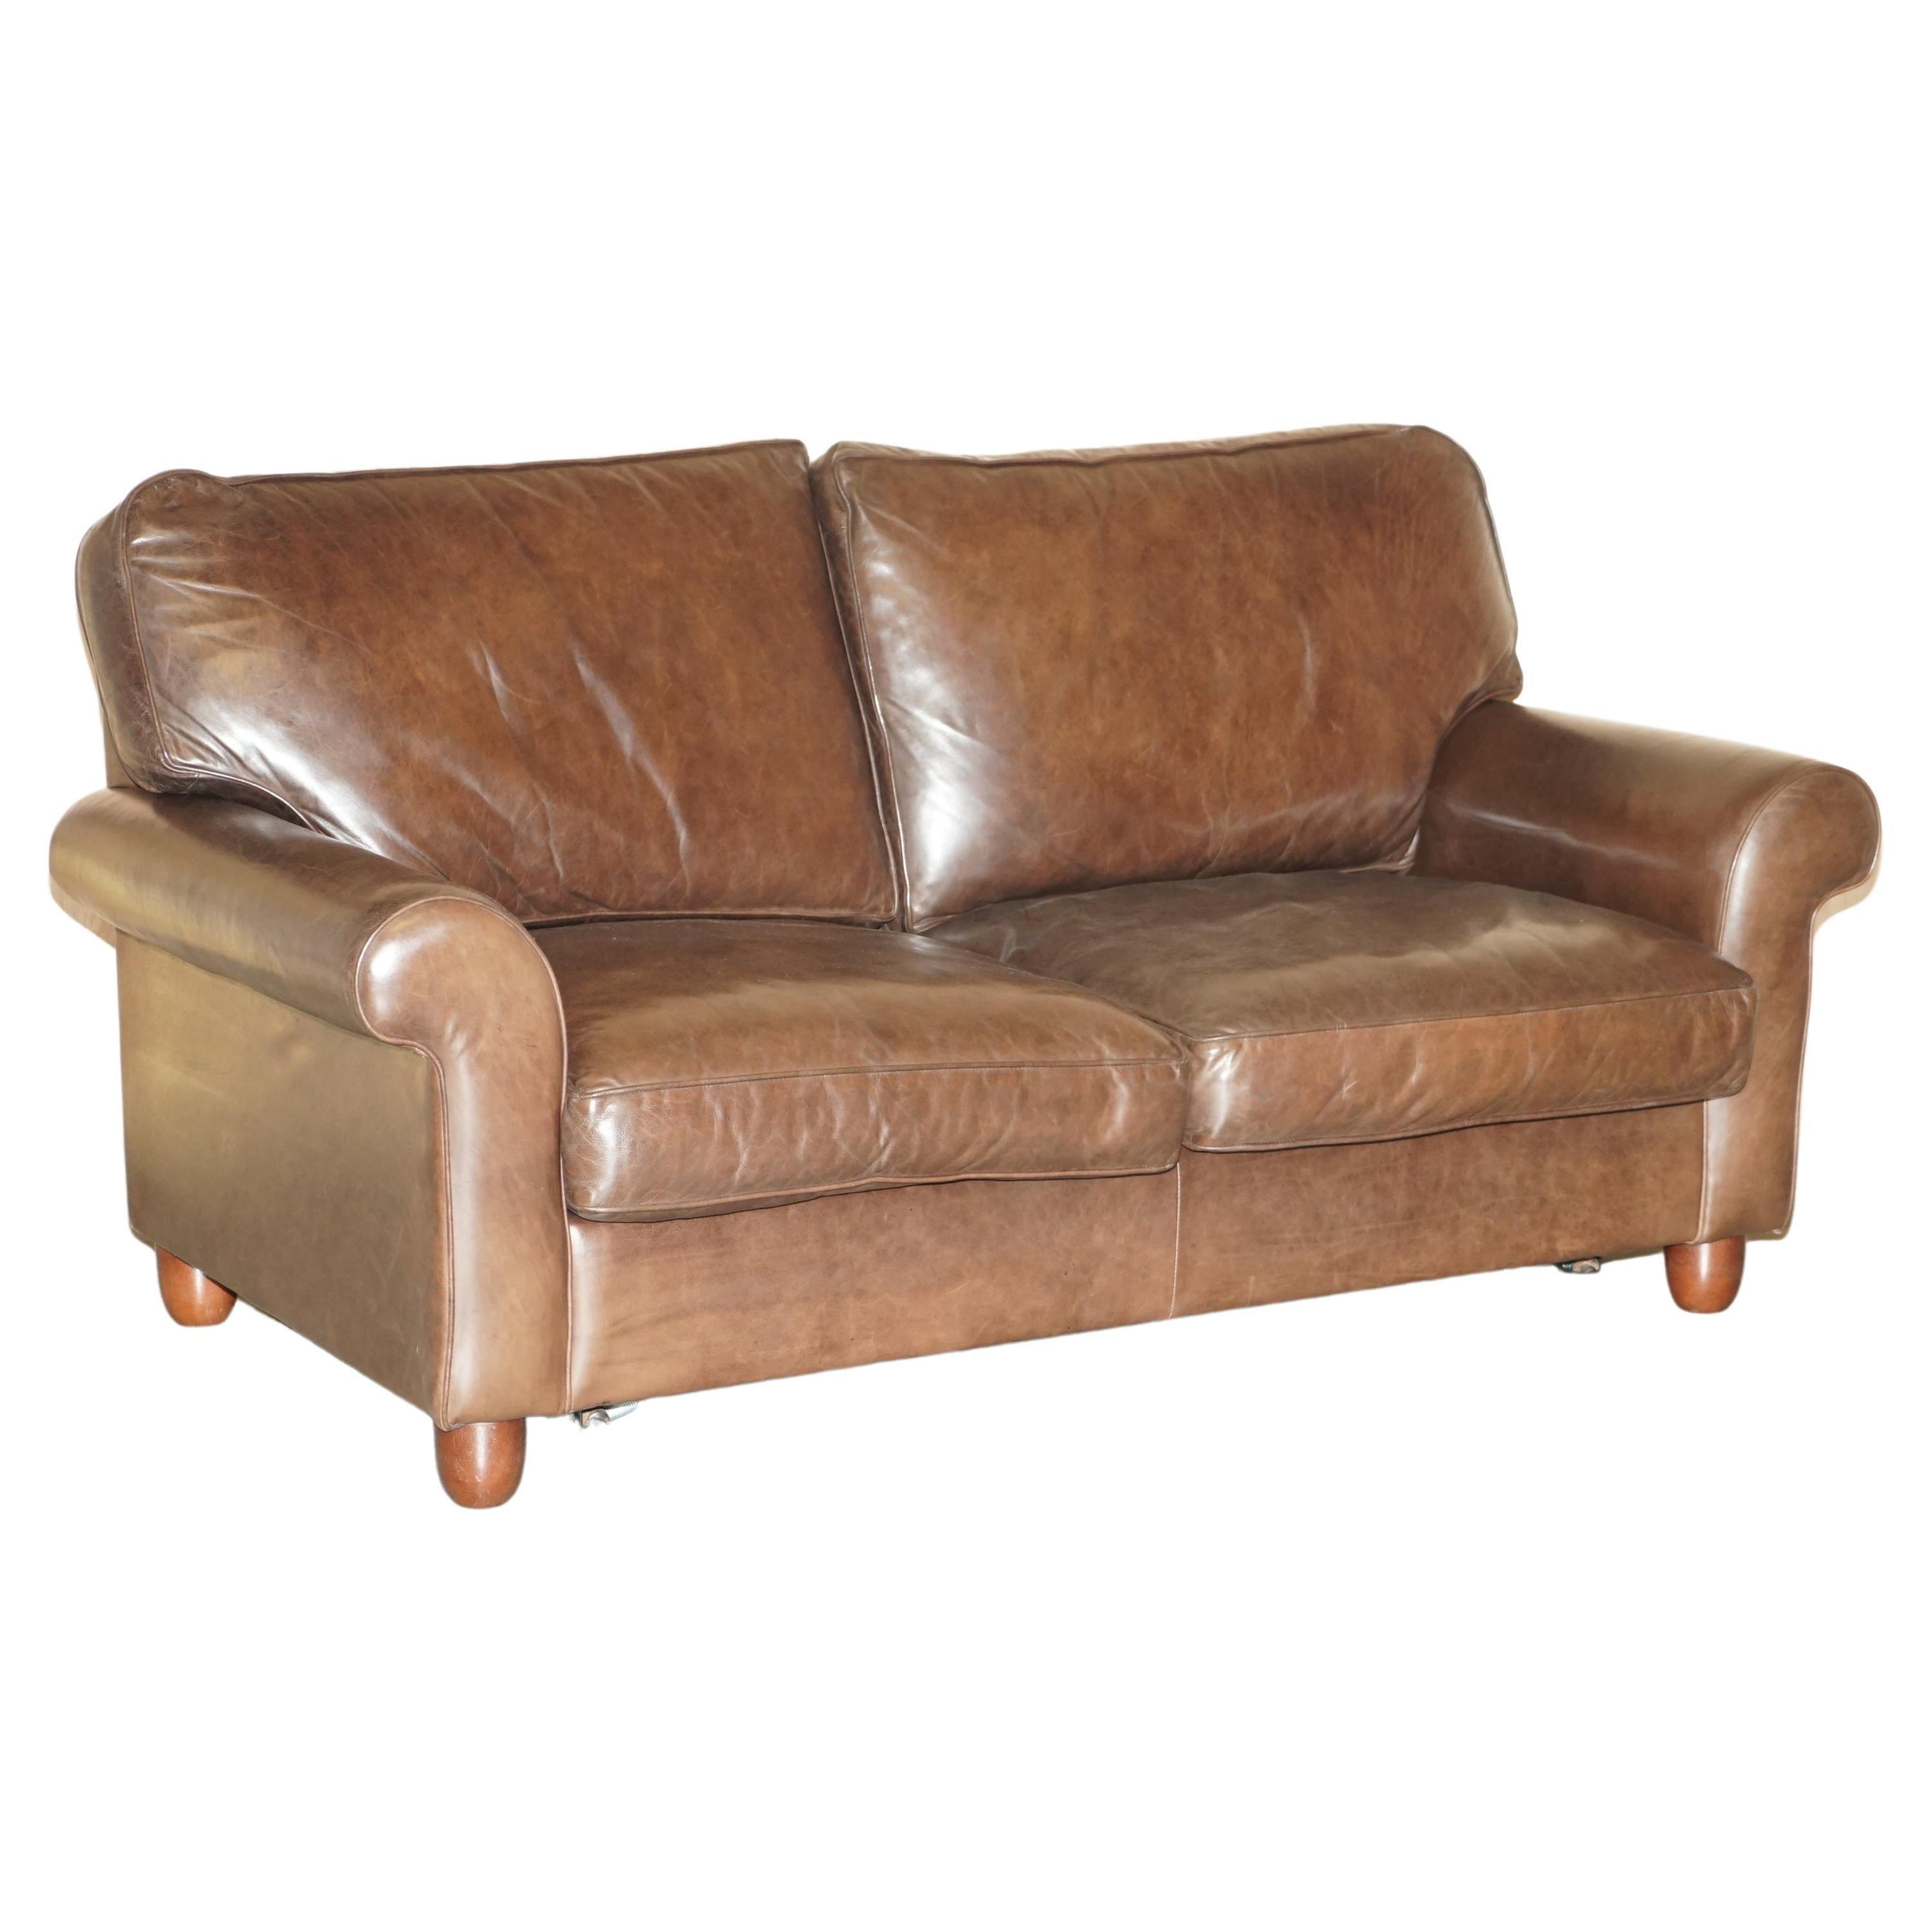 Lovely Heritage Brown Leather Laura Ashley Mortimer Sofabed in Very Nice  Order For Sale at 1stDibs